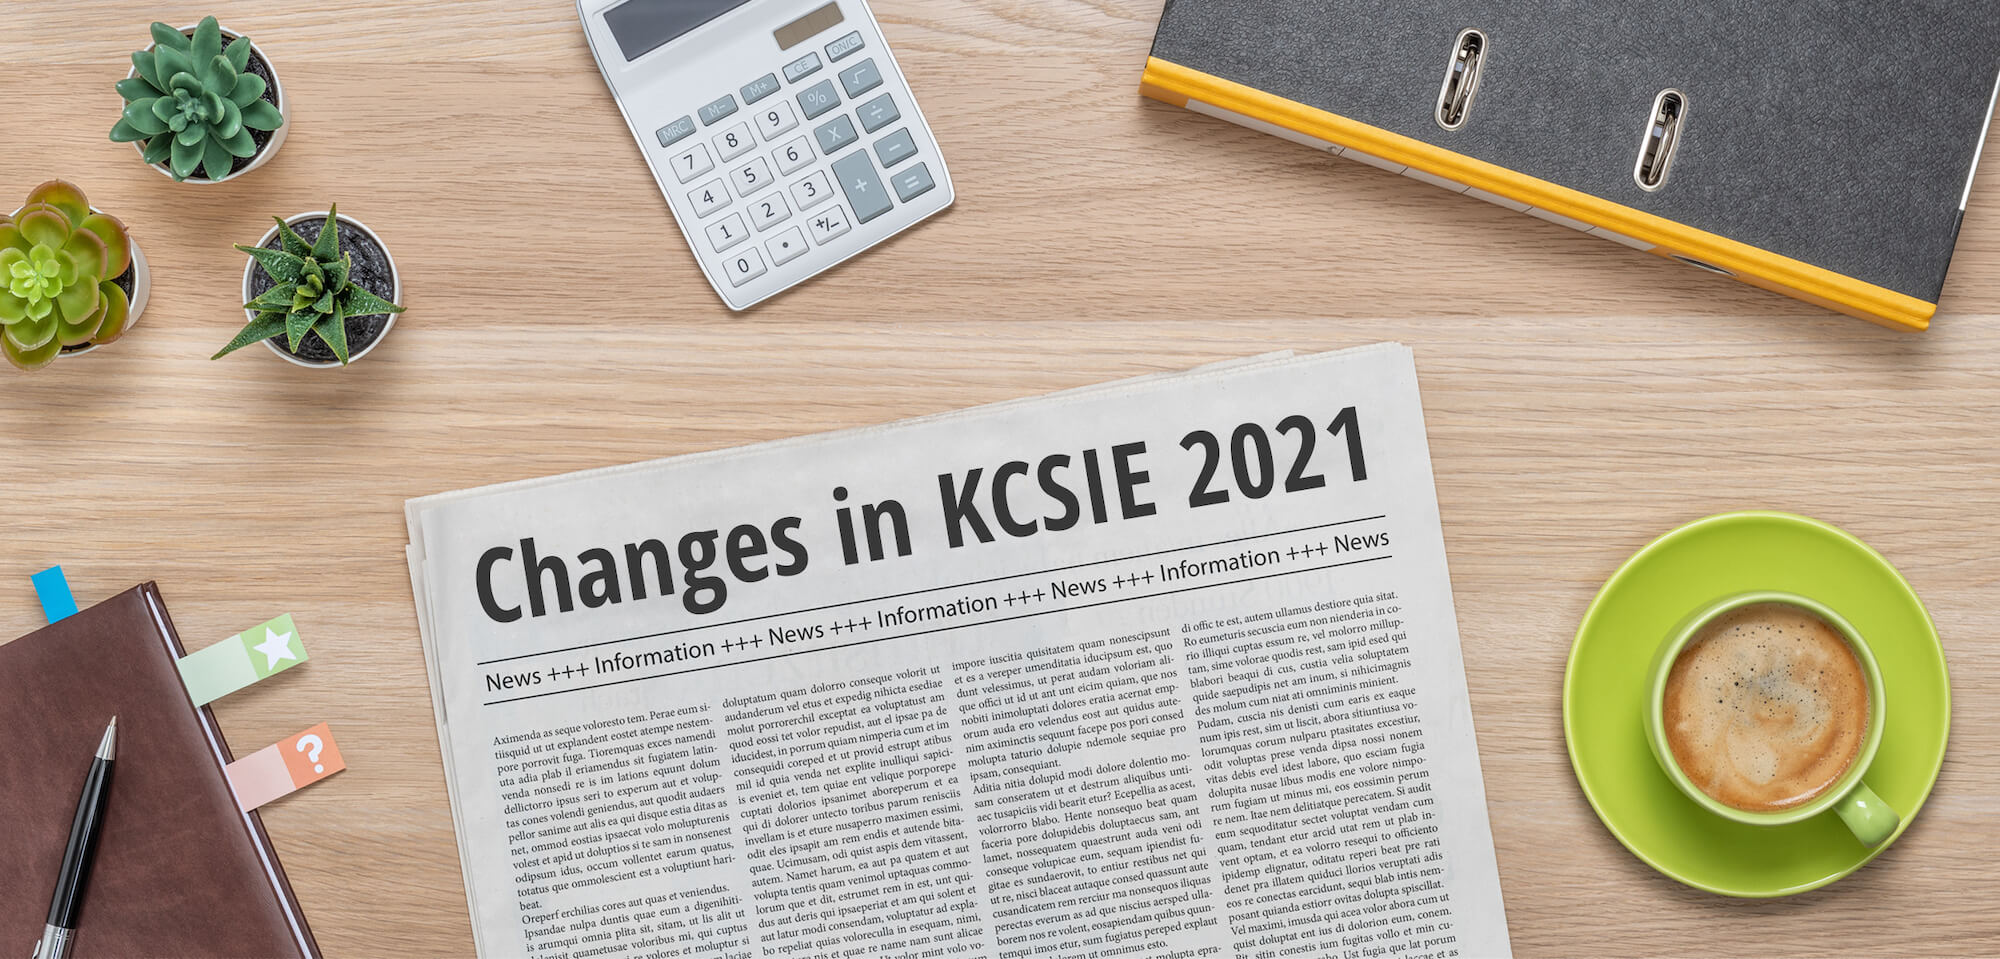 KCSIE 2021 - What’s new? feature image